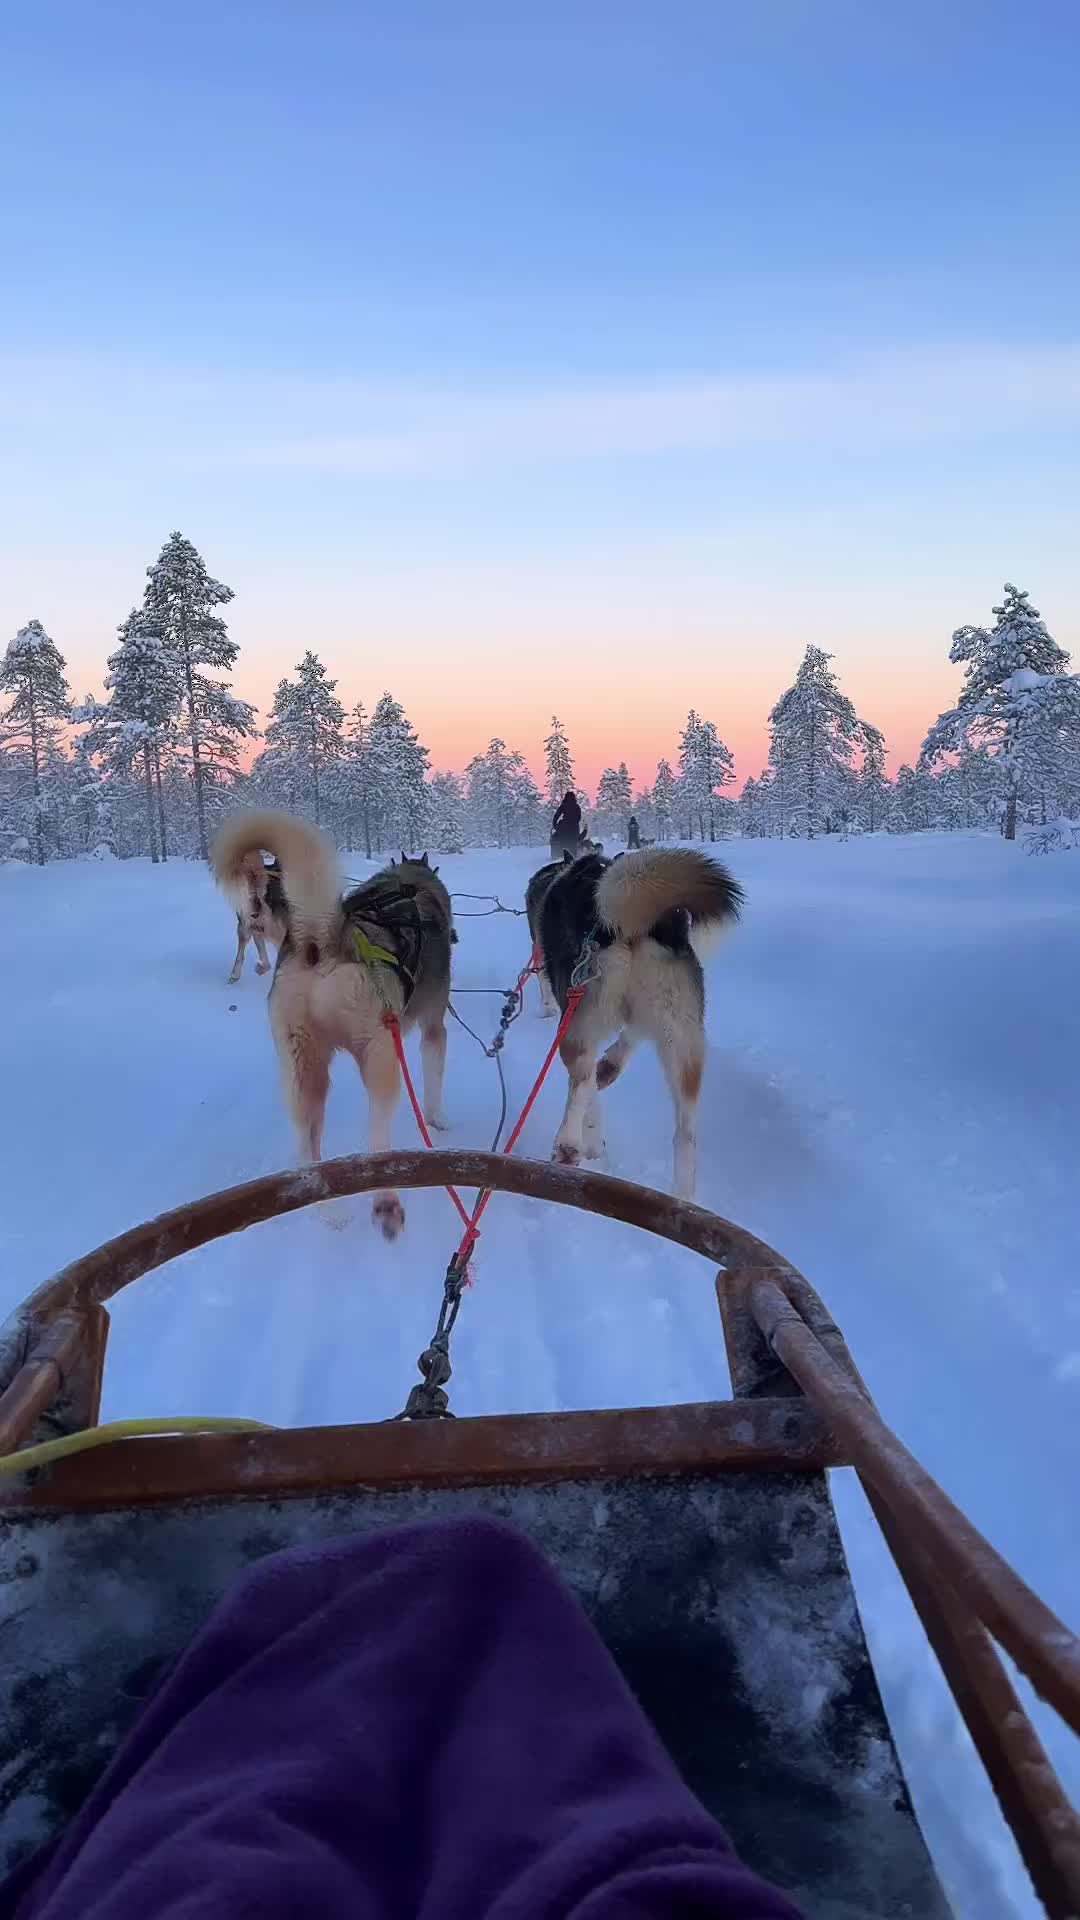 Another reel from the series Instagram vs Reality 😅

How a husky safari tour looks like from two perspectives 😅

PS: we are ok, thanks to all the layers that we had on us 🤍 

#huskysafari #lapland #finland #visitlapland #levilapland #exploretheworld #experience #memories #travel #coupletravel #couplegoals